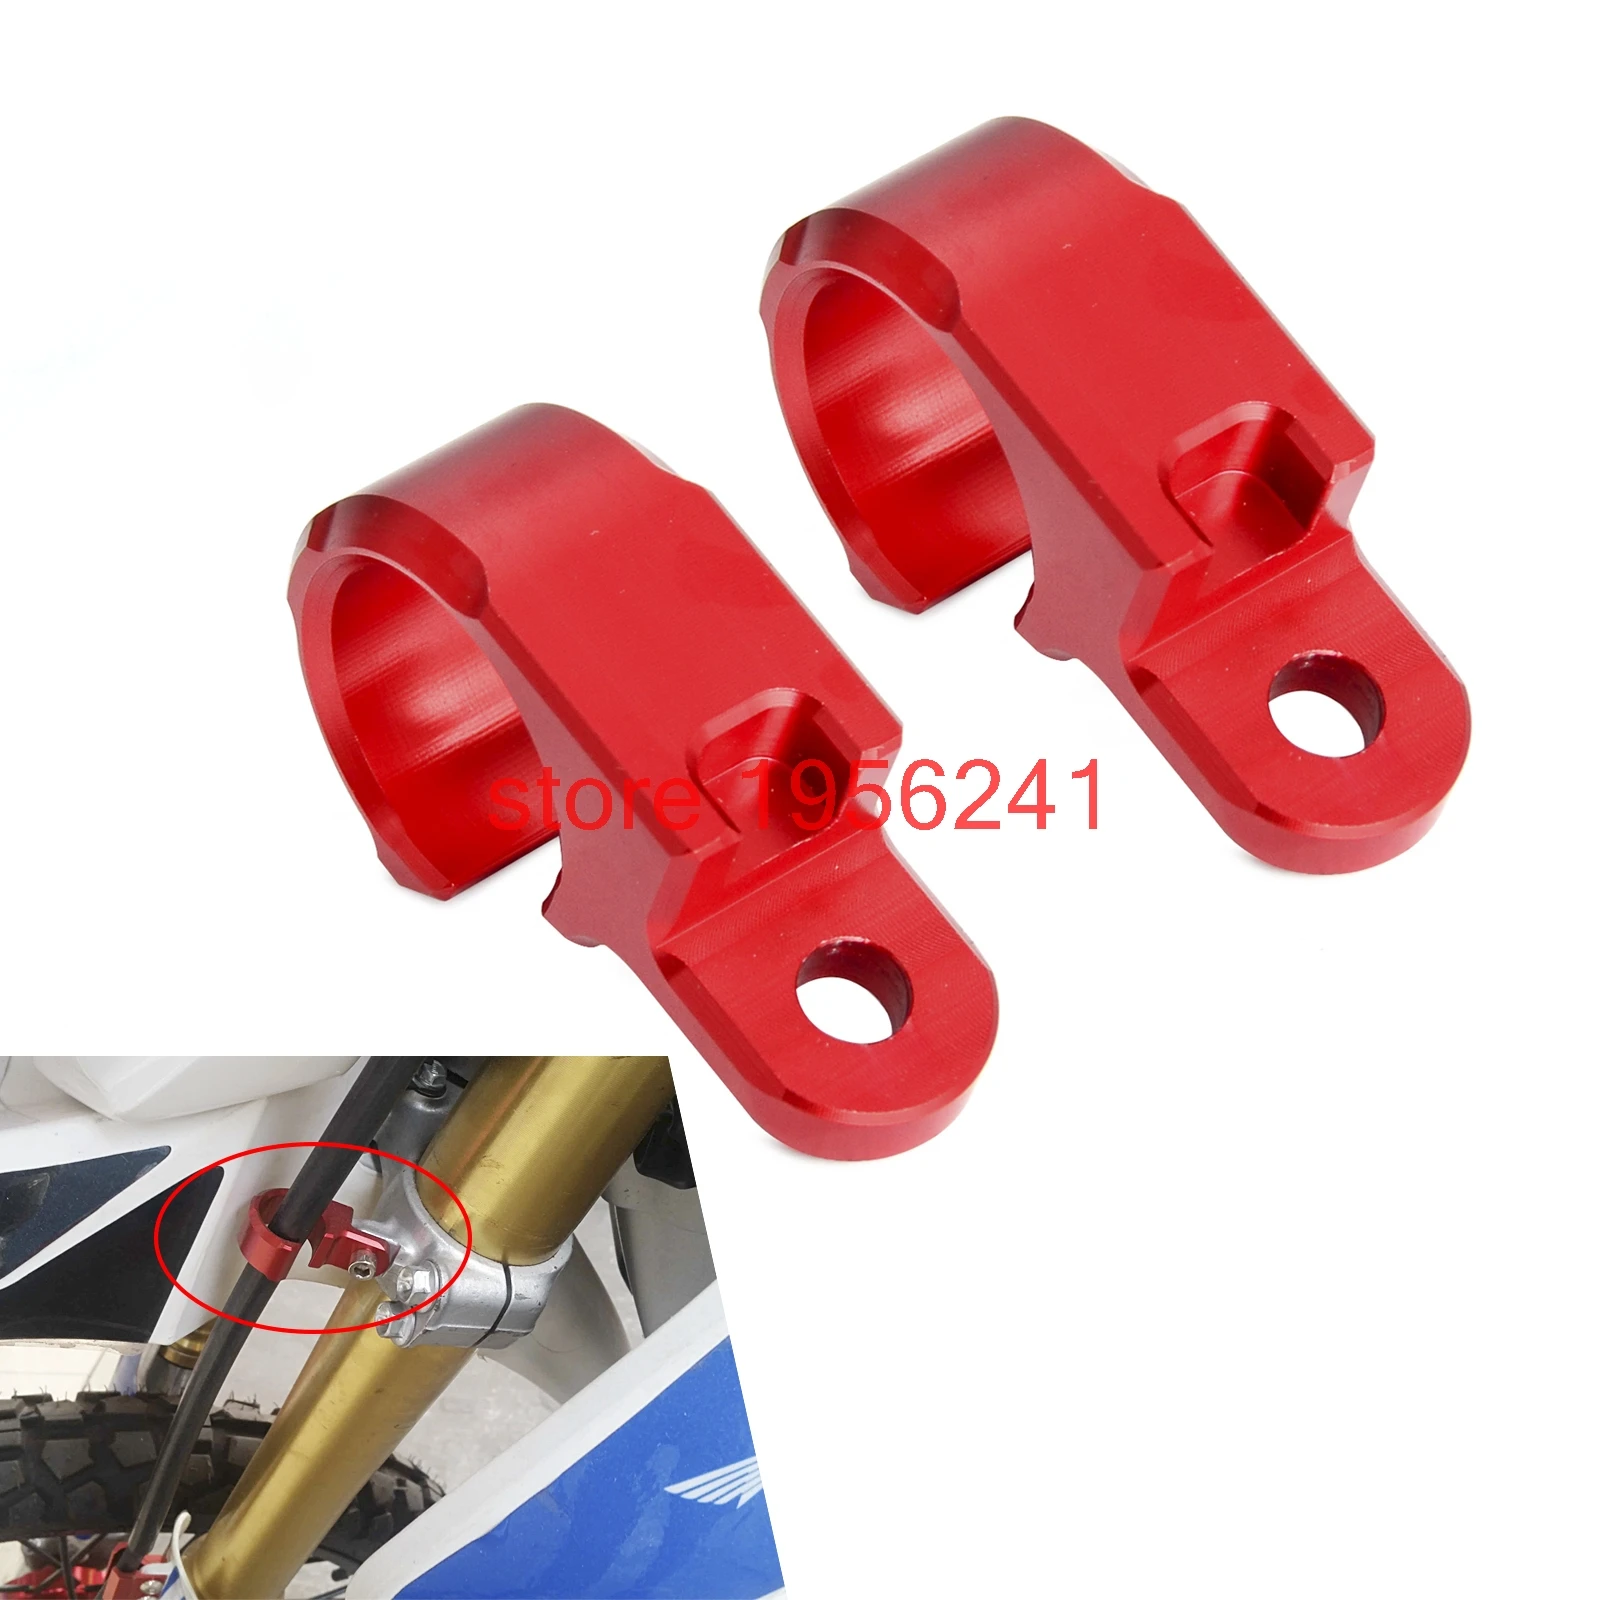 Red Gear Lever/Red Brake Pedal/Gold Bling Kit Fit Honda CRF250R 2015 2016